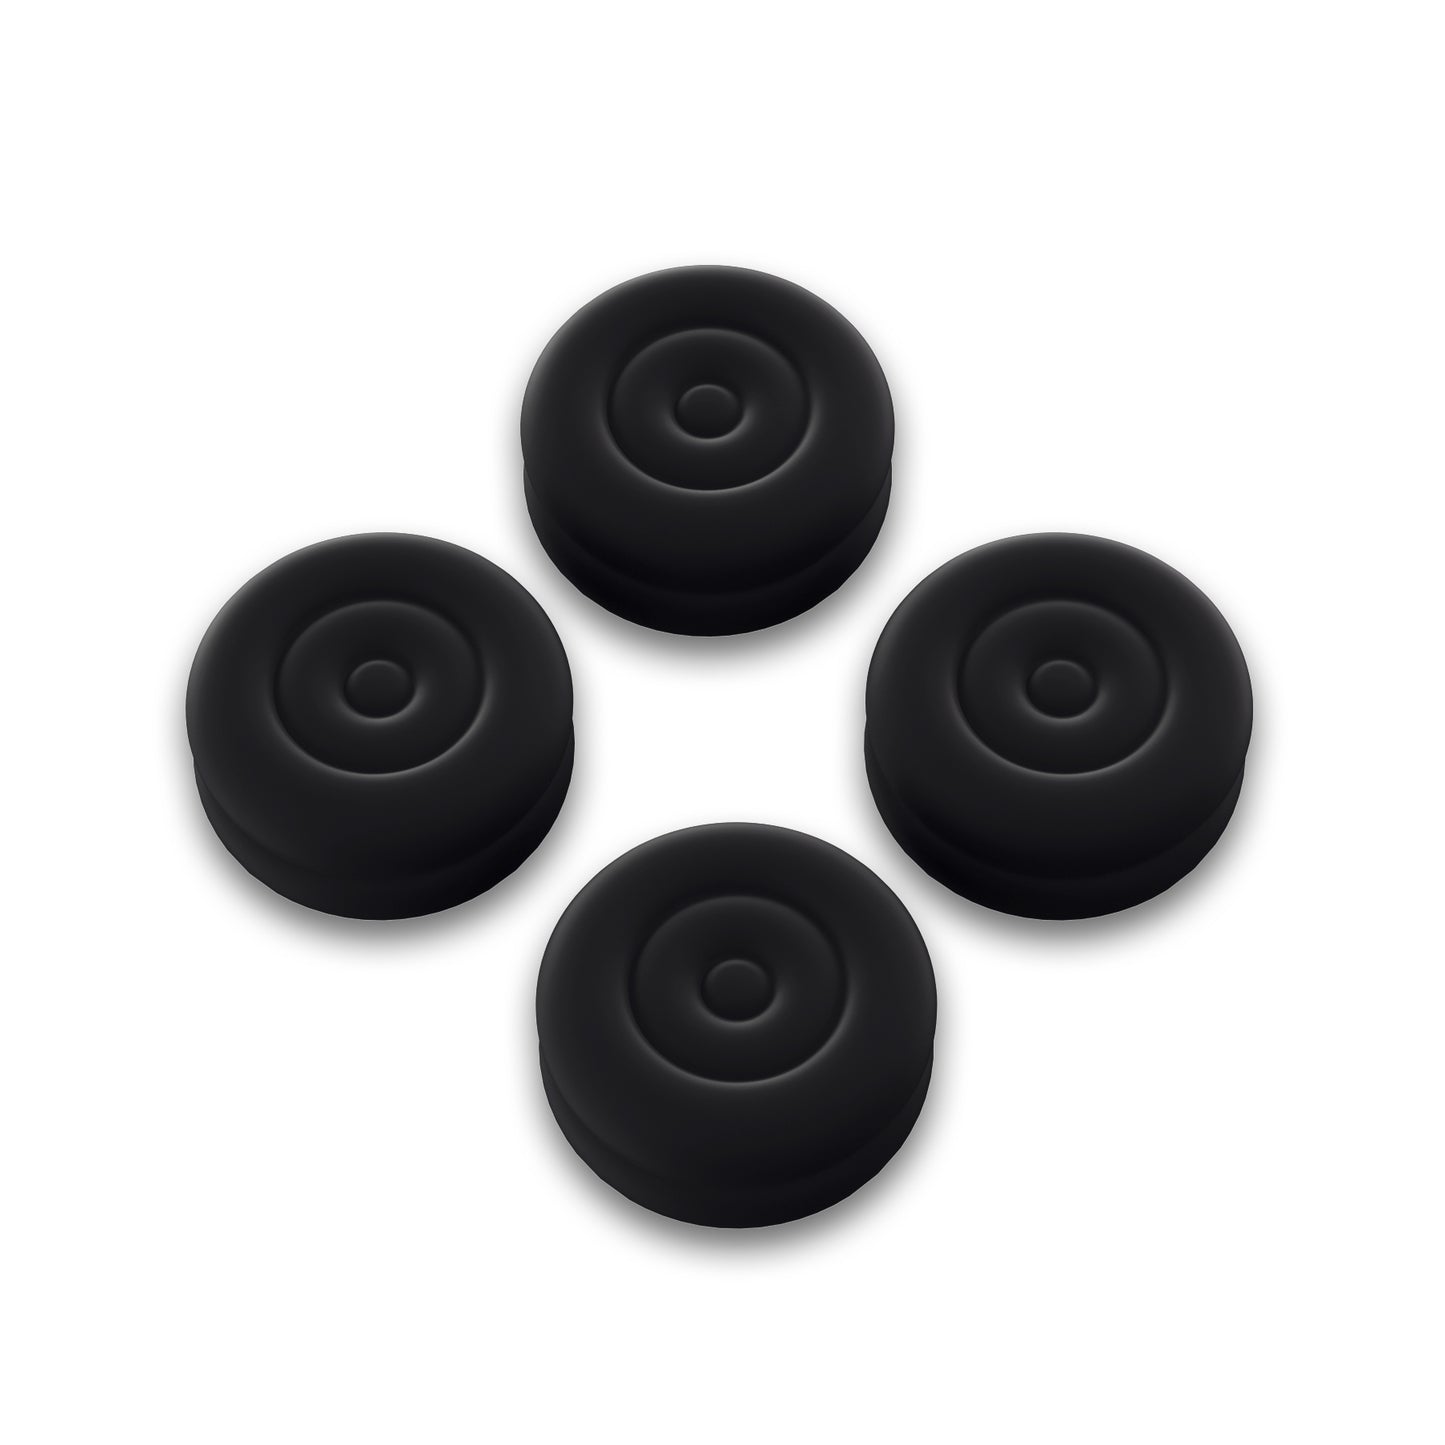 PlayVital Thumbs Cushion Caps Thumb Grips for ps5, for ps4, Thumbstick Grip Cover for Xbox Series X/S, Thumb Grip Caps for Xbox One, Elite Series 2, for Switch Pro Controller - Black - PJM3021 PlayVital